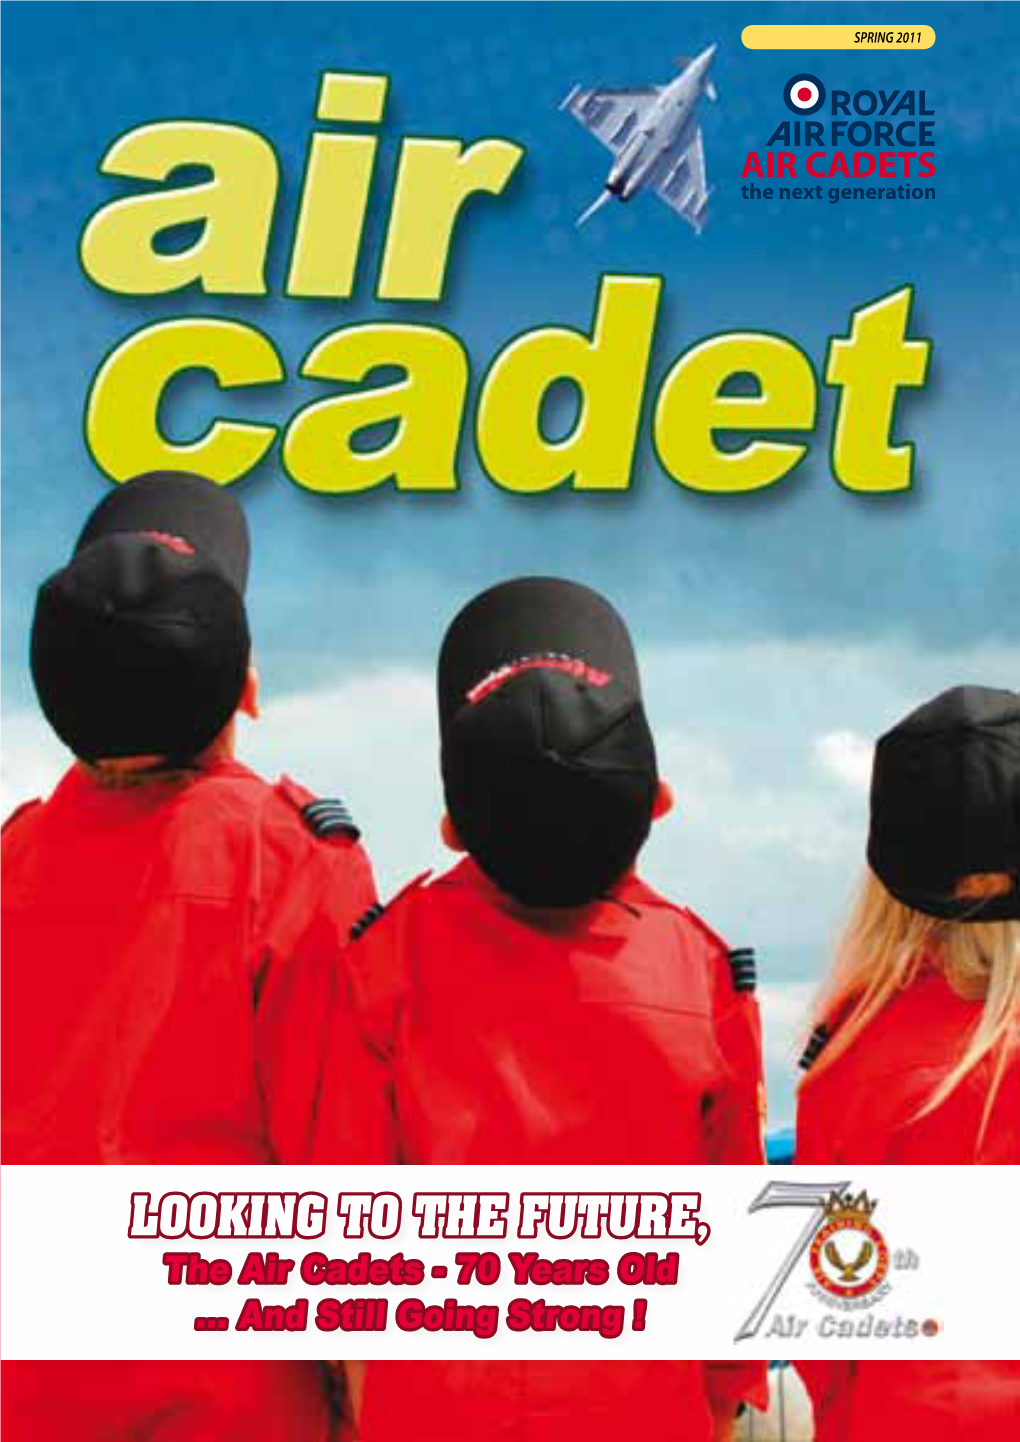 LOOKING to the FUTURE, the Air Cadets - 70 Years Old